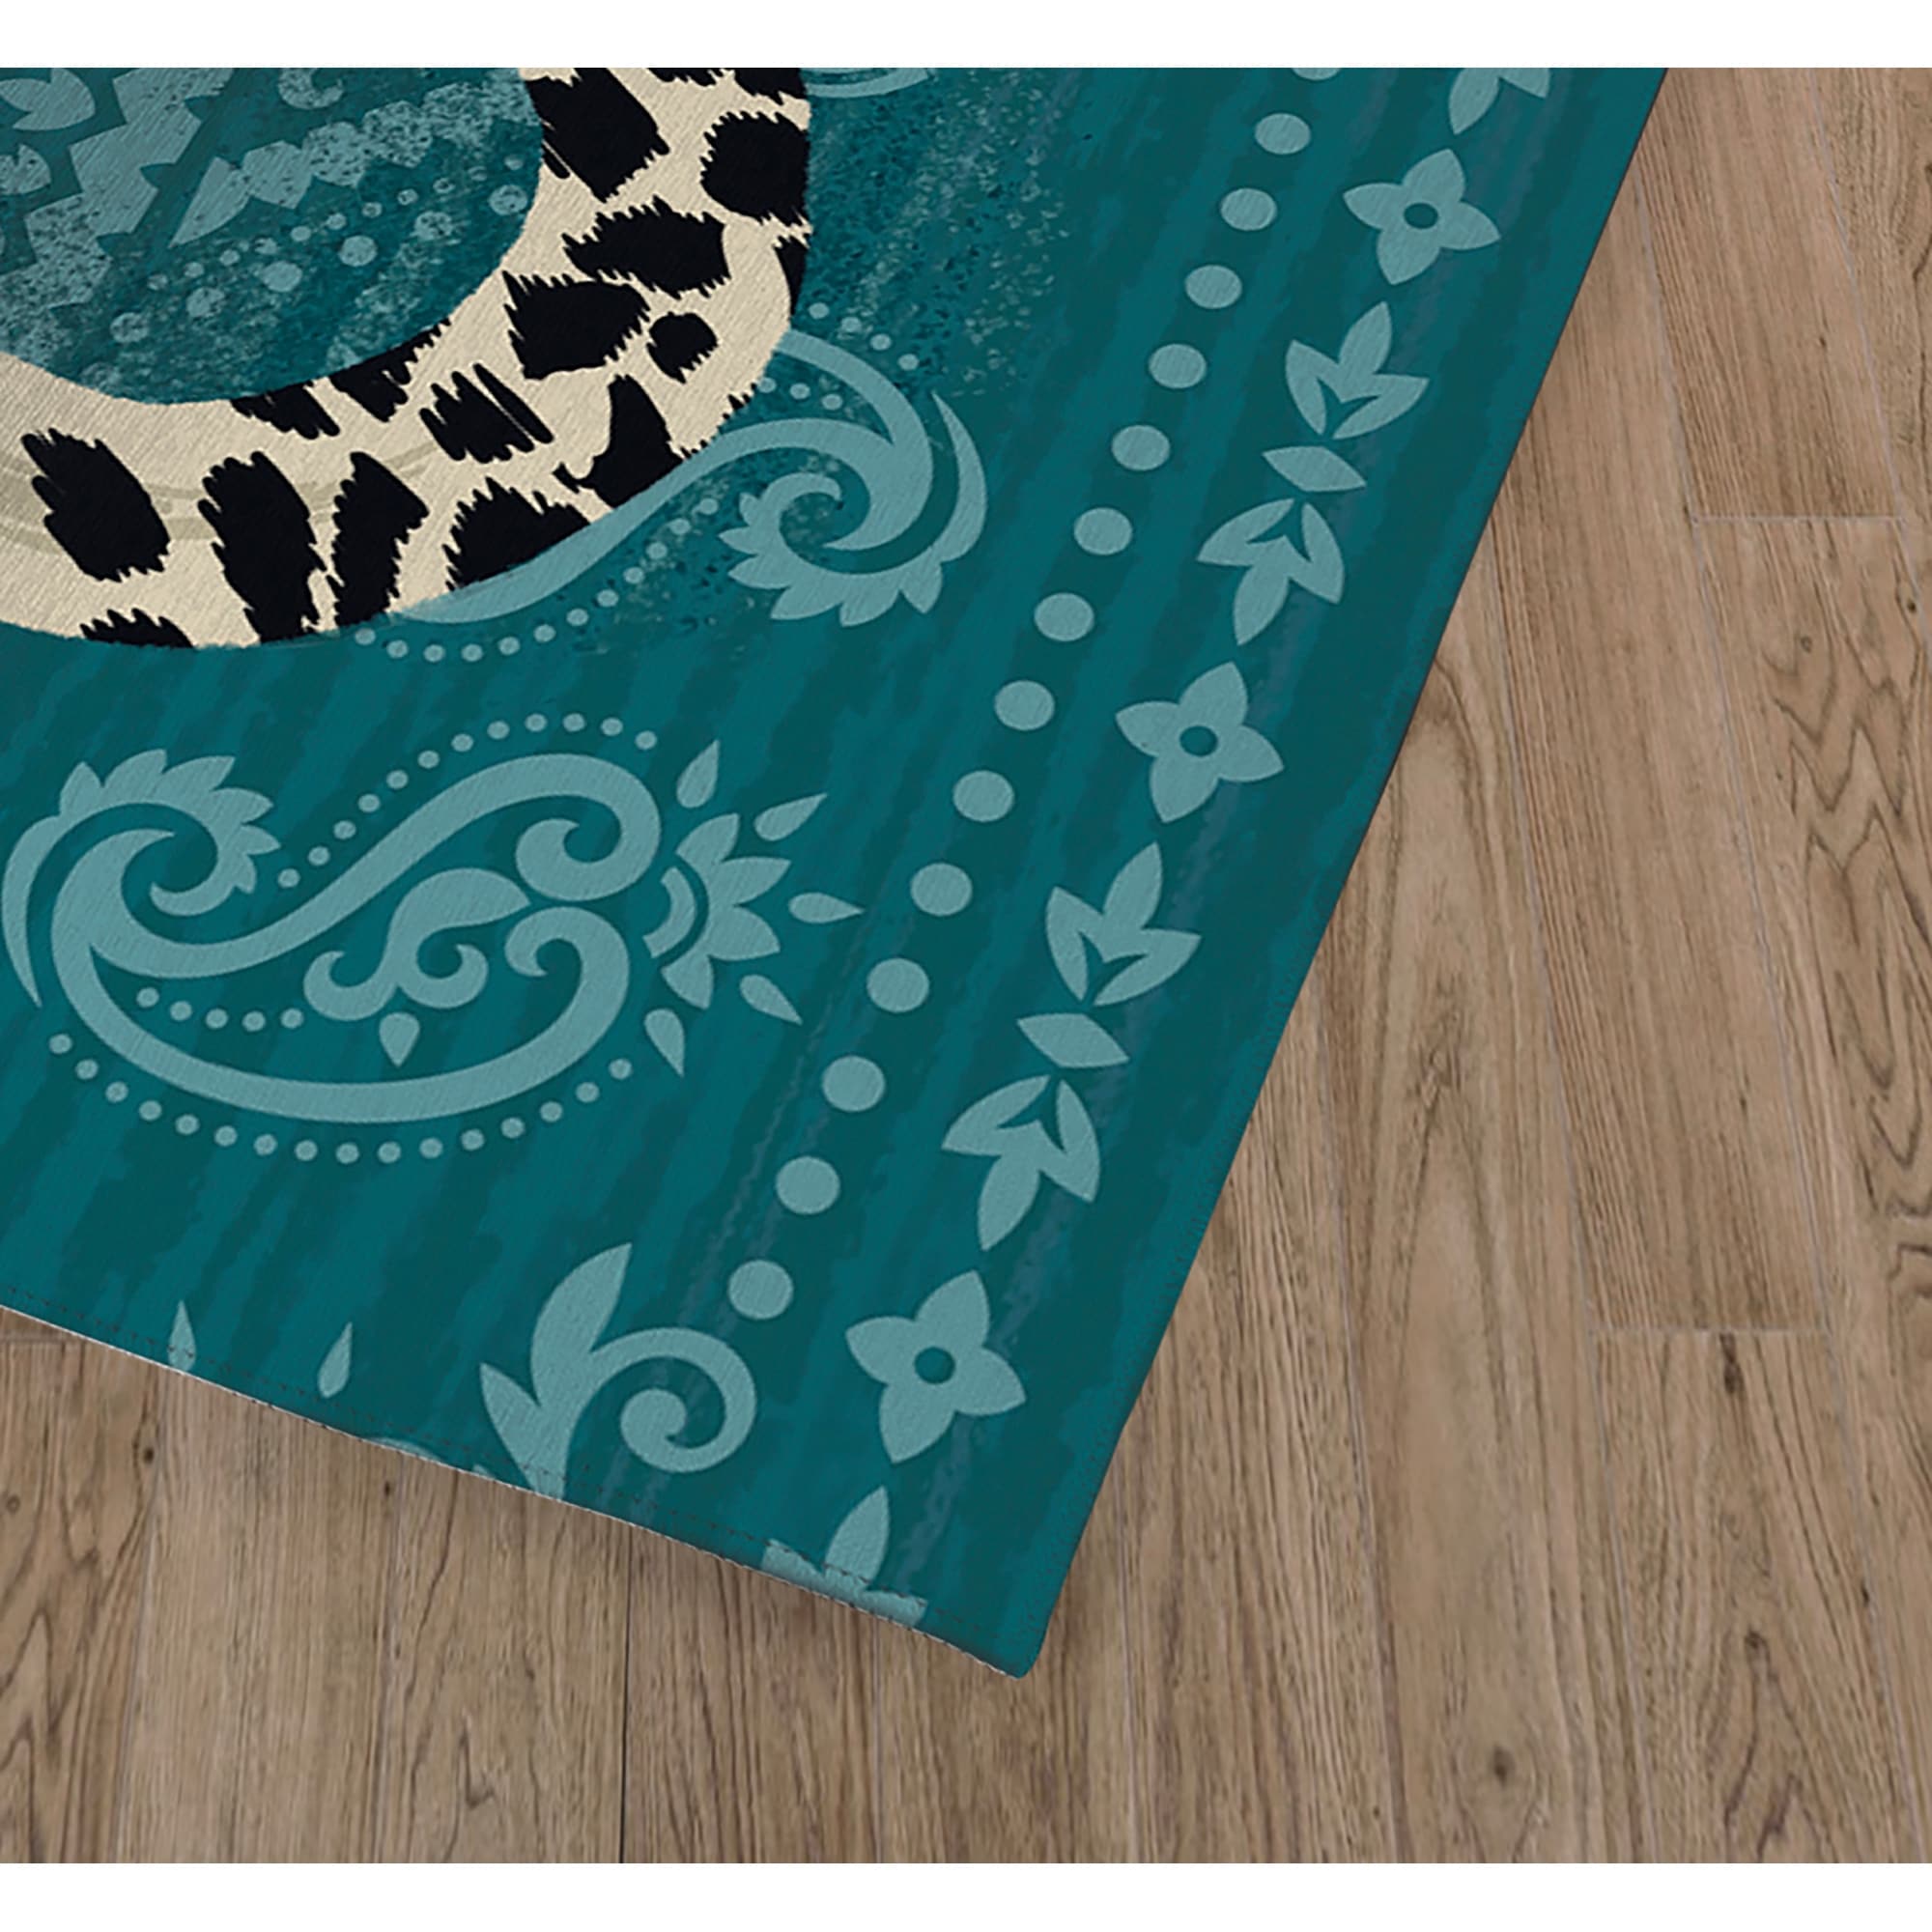 https://ak1.ostkcdn.com/images/products/is/images/direct/10745ce1a409f4e8913f49e83d1fe02cdf3128d8/SNOW-LEOPARD-TEAL-Kitchen-Mat-By-Kavka-Designs.jpg